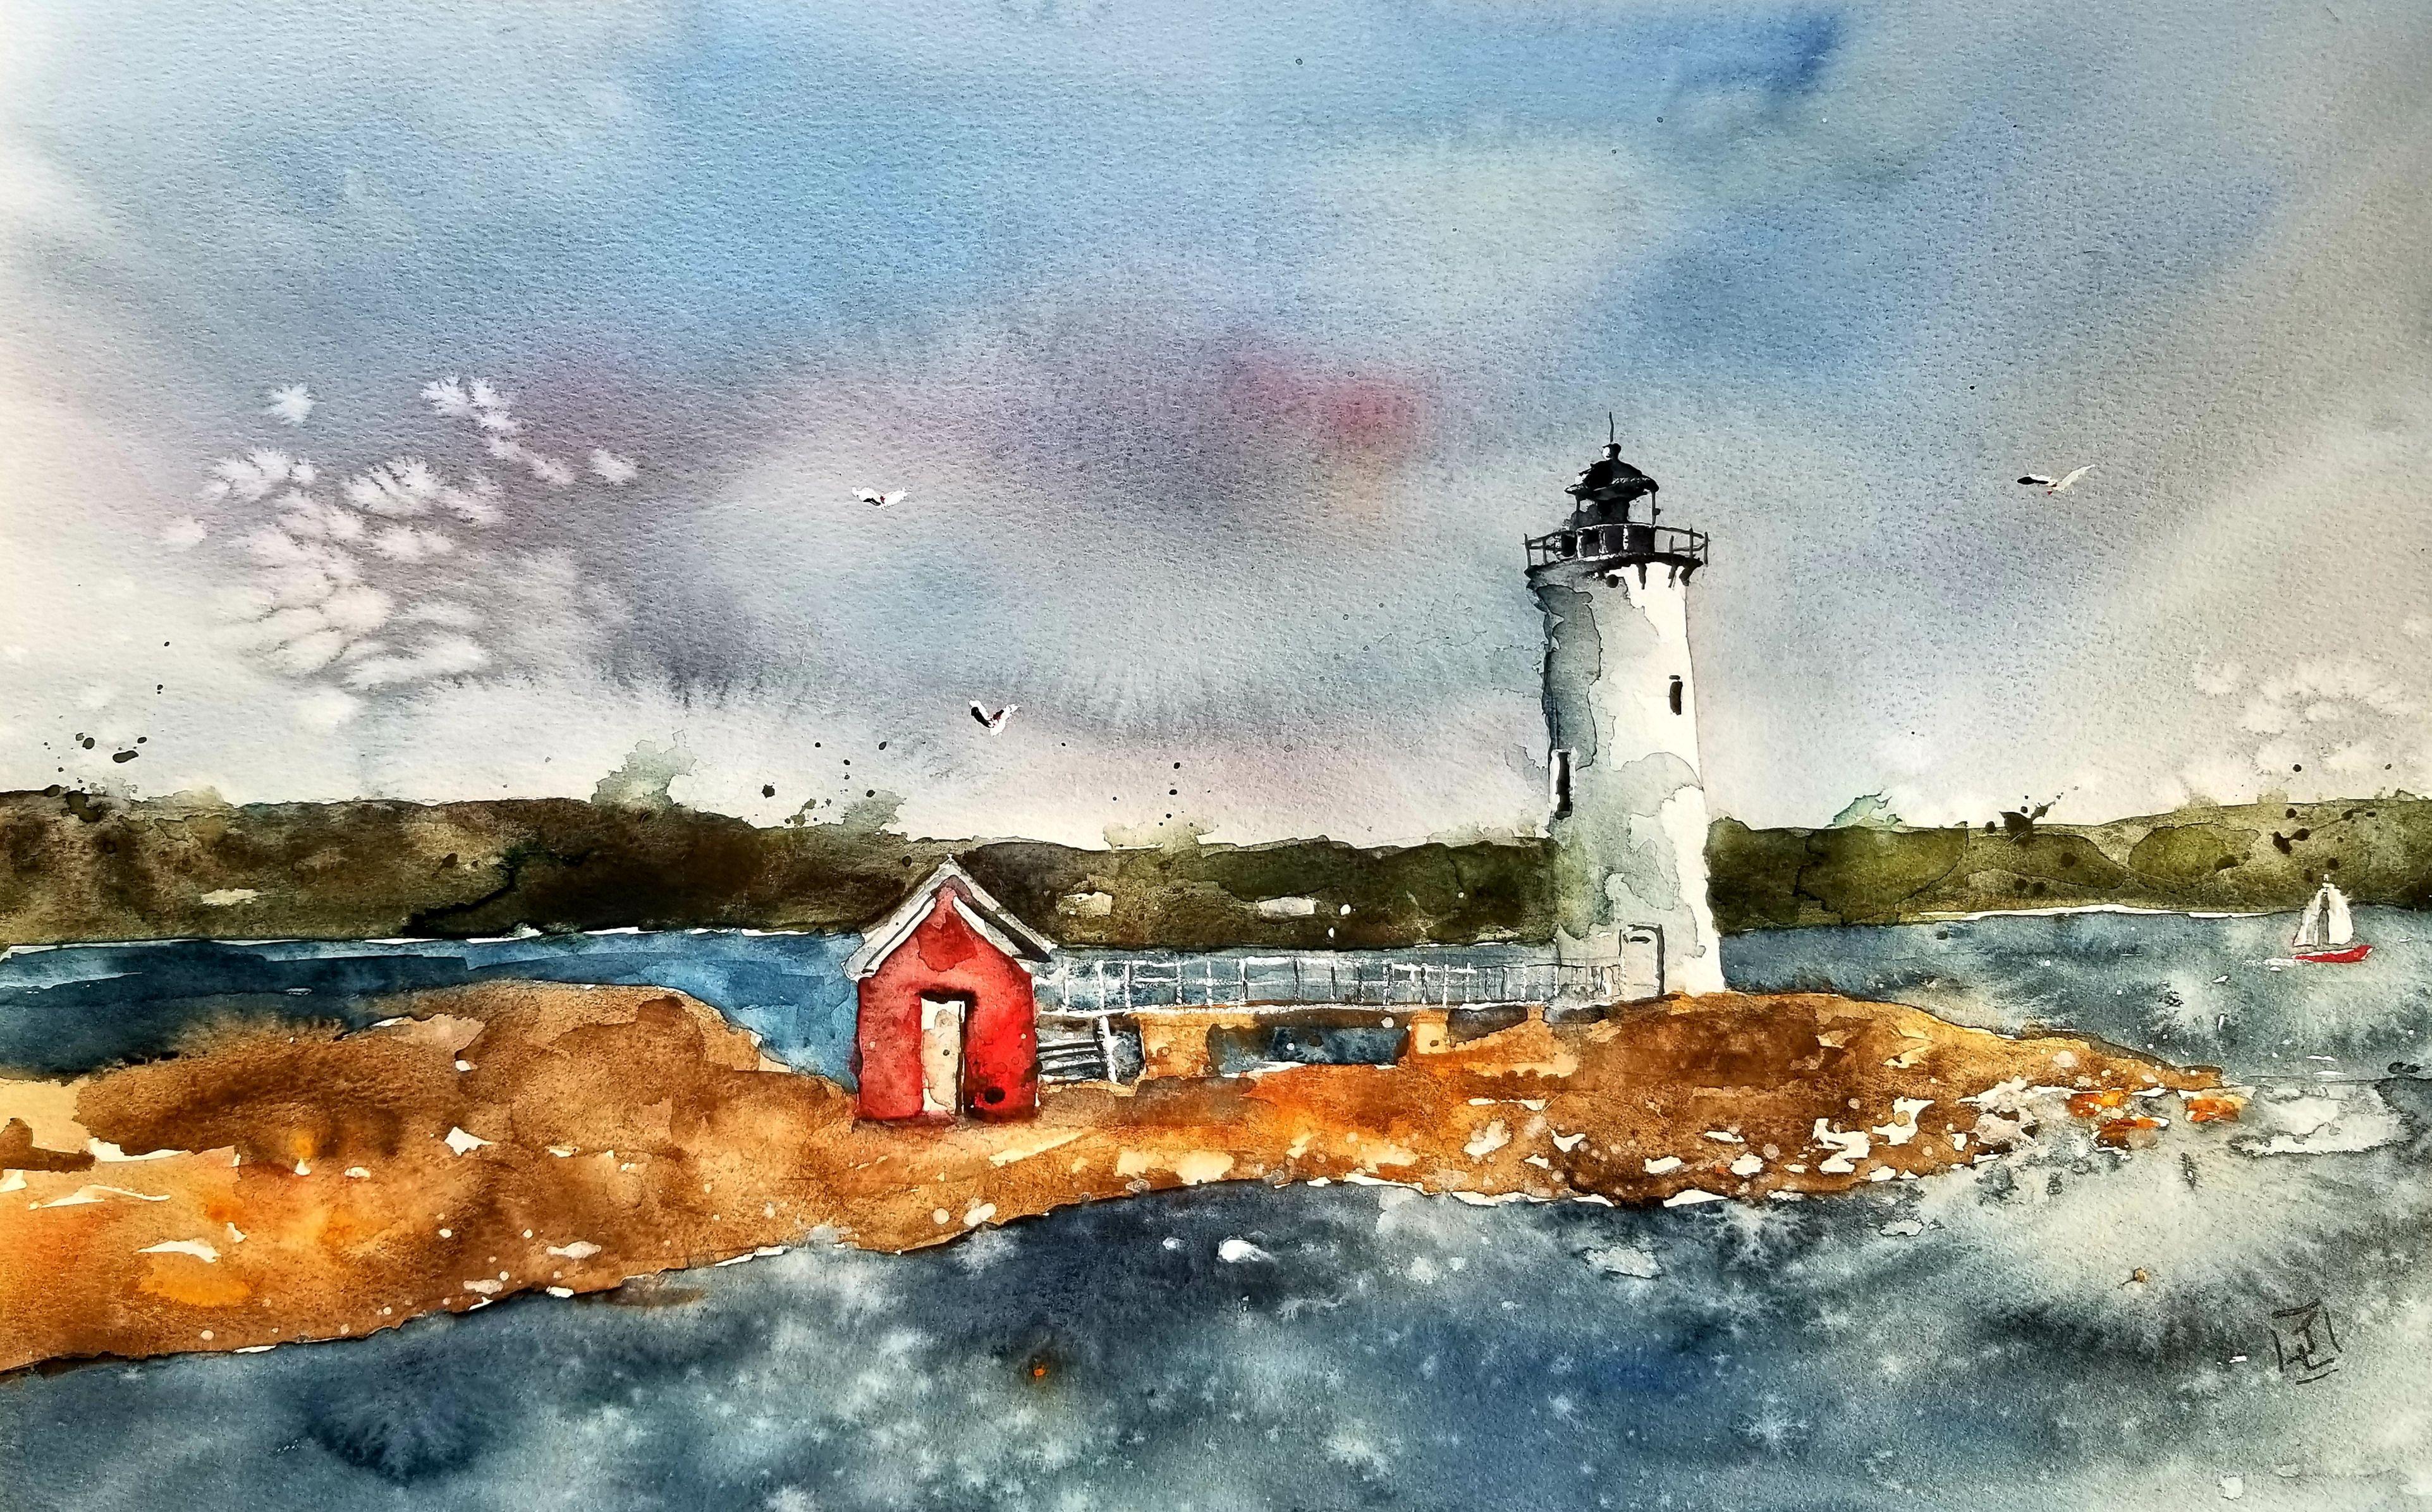 New England Lighthouse, Painting, Watercolor on Watercolor Paper - Art by Jim Lagasse